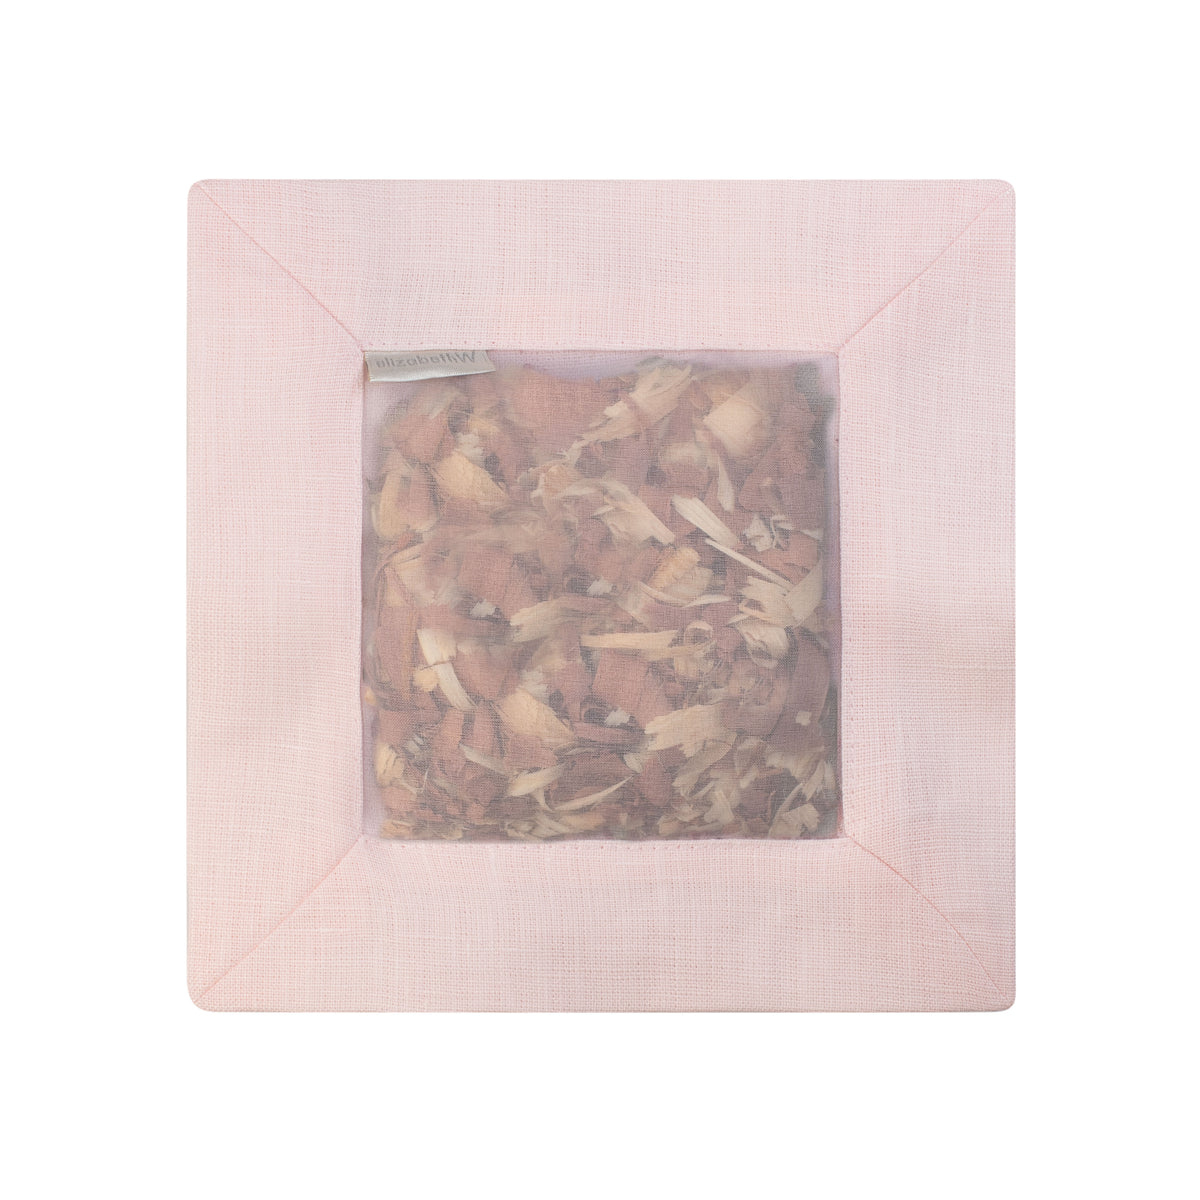 Cedar filled inside of a pink colored square sachet with a transparent screen